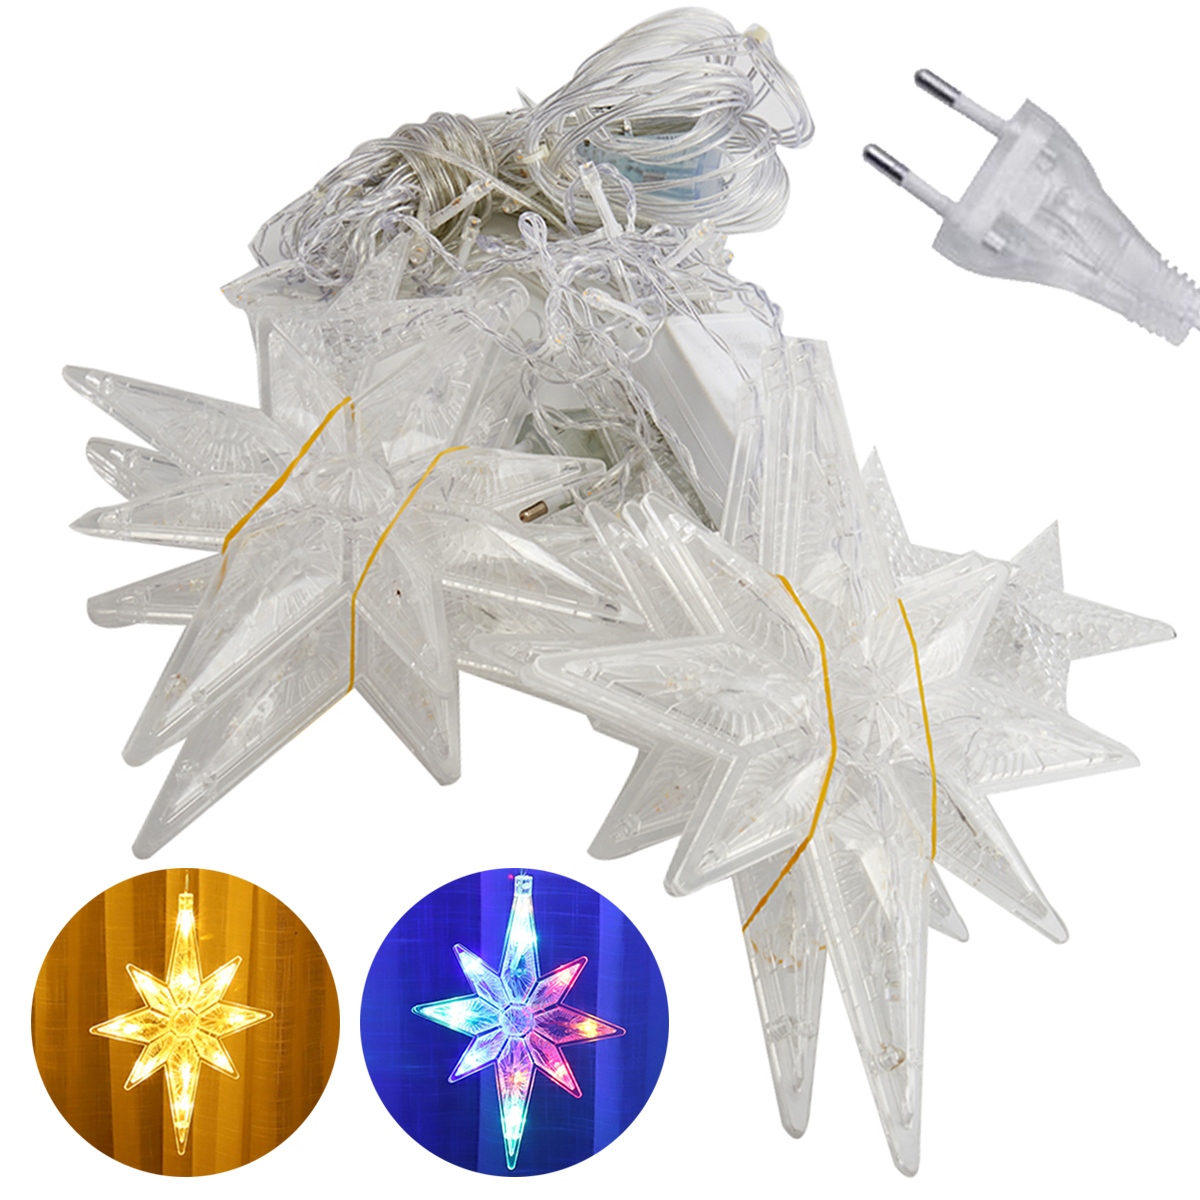 Star-Curtain-Window-String-Light-LED-Fairy-Christmas-Decorations-Lights-Holidays-Party-Wedding-Outdo-1781168-3